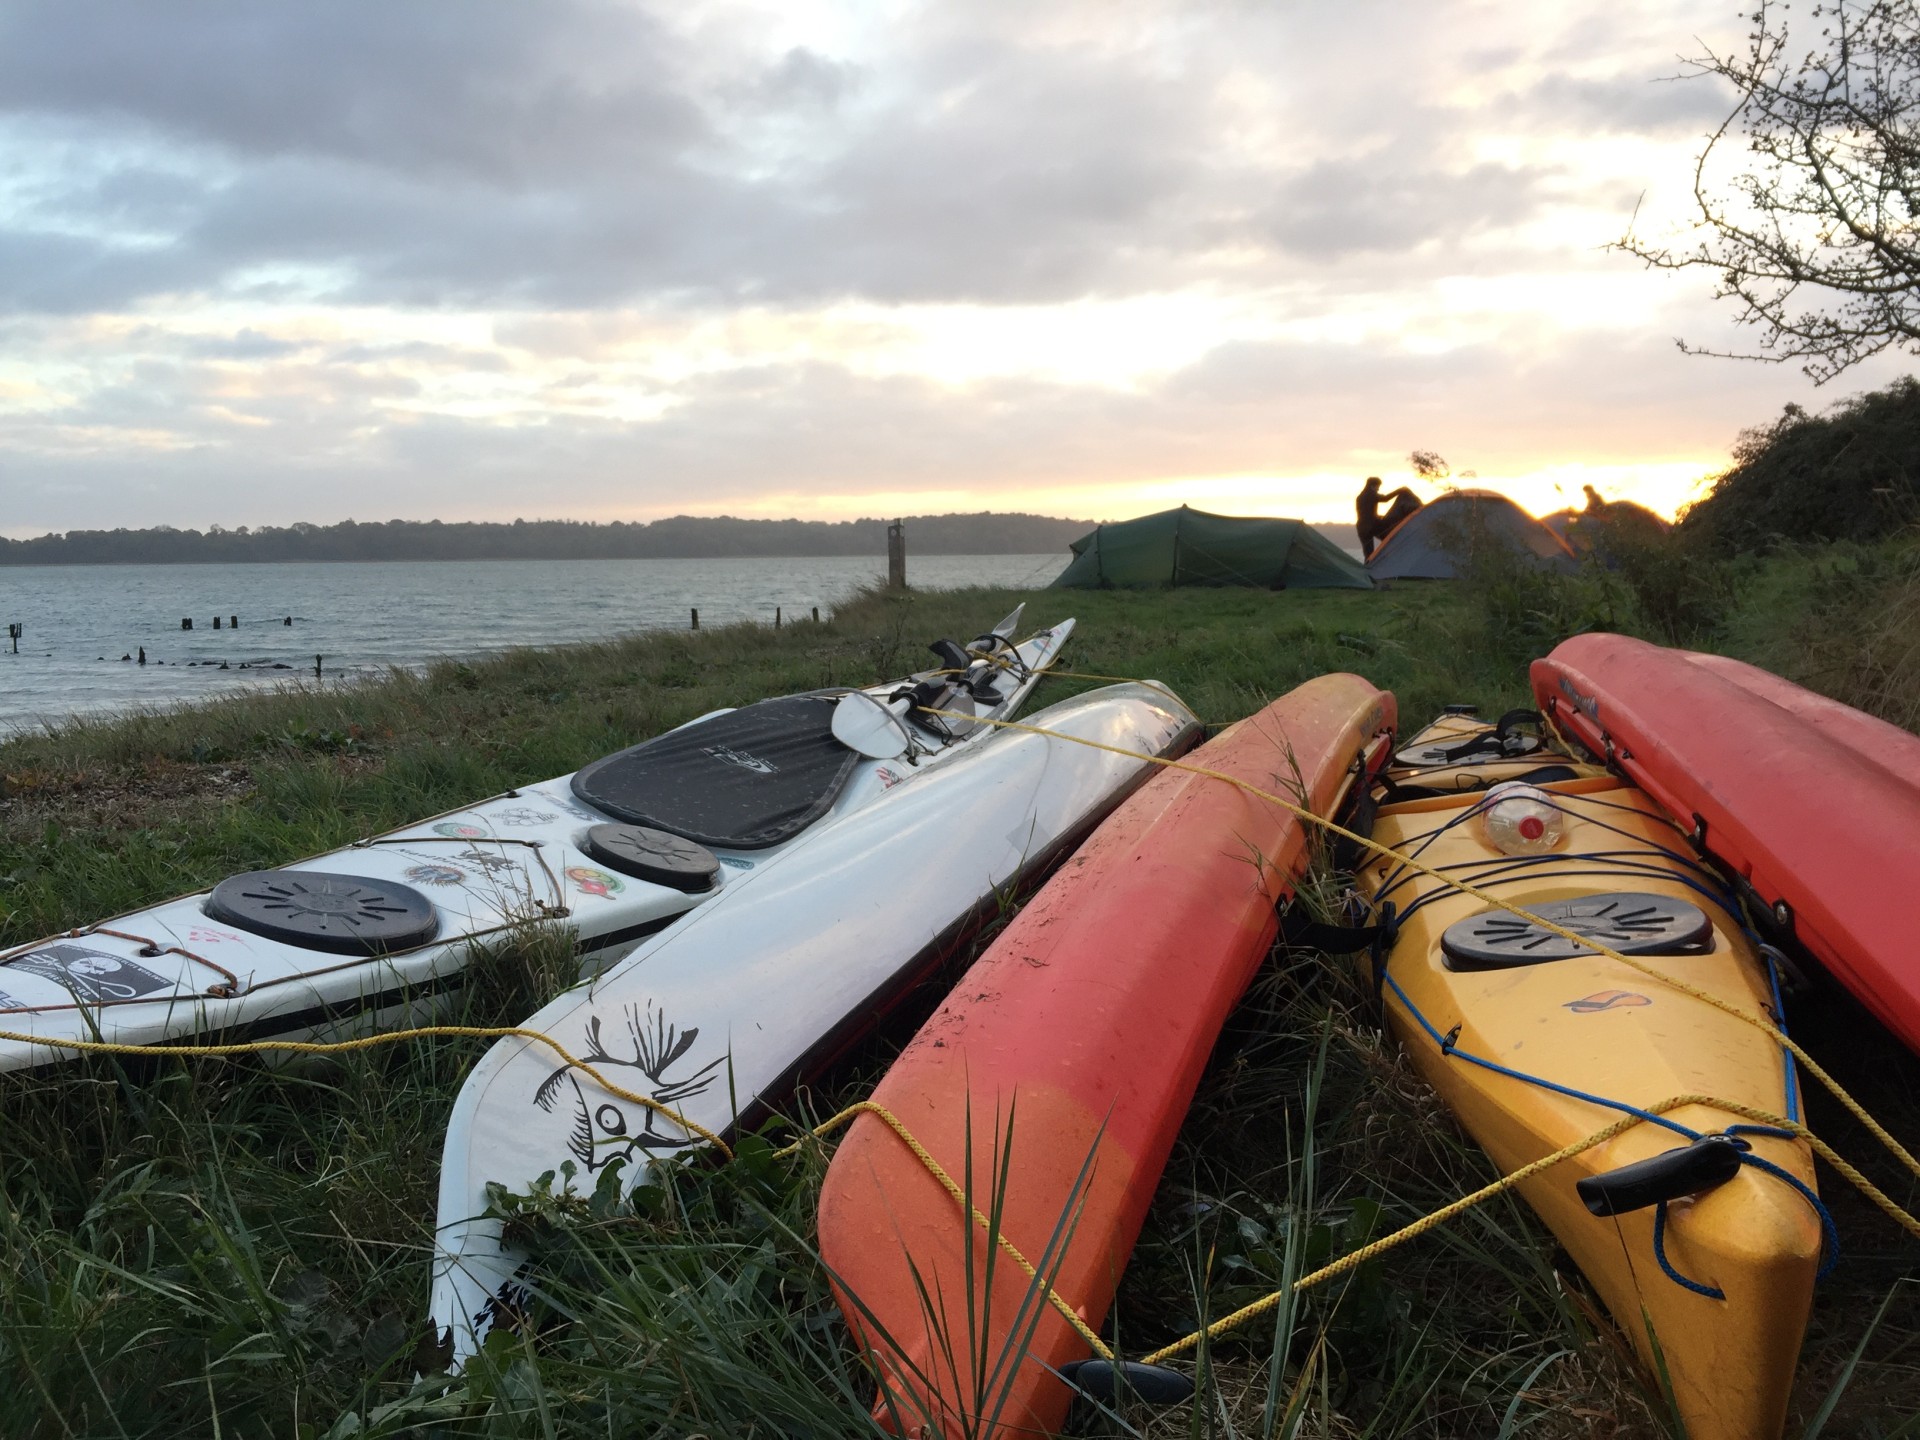 A selection of sea kayaks tethered for a nights wild camping with NOMAD Sea Kayaking.